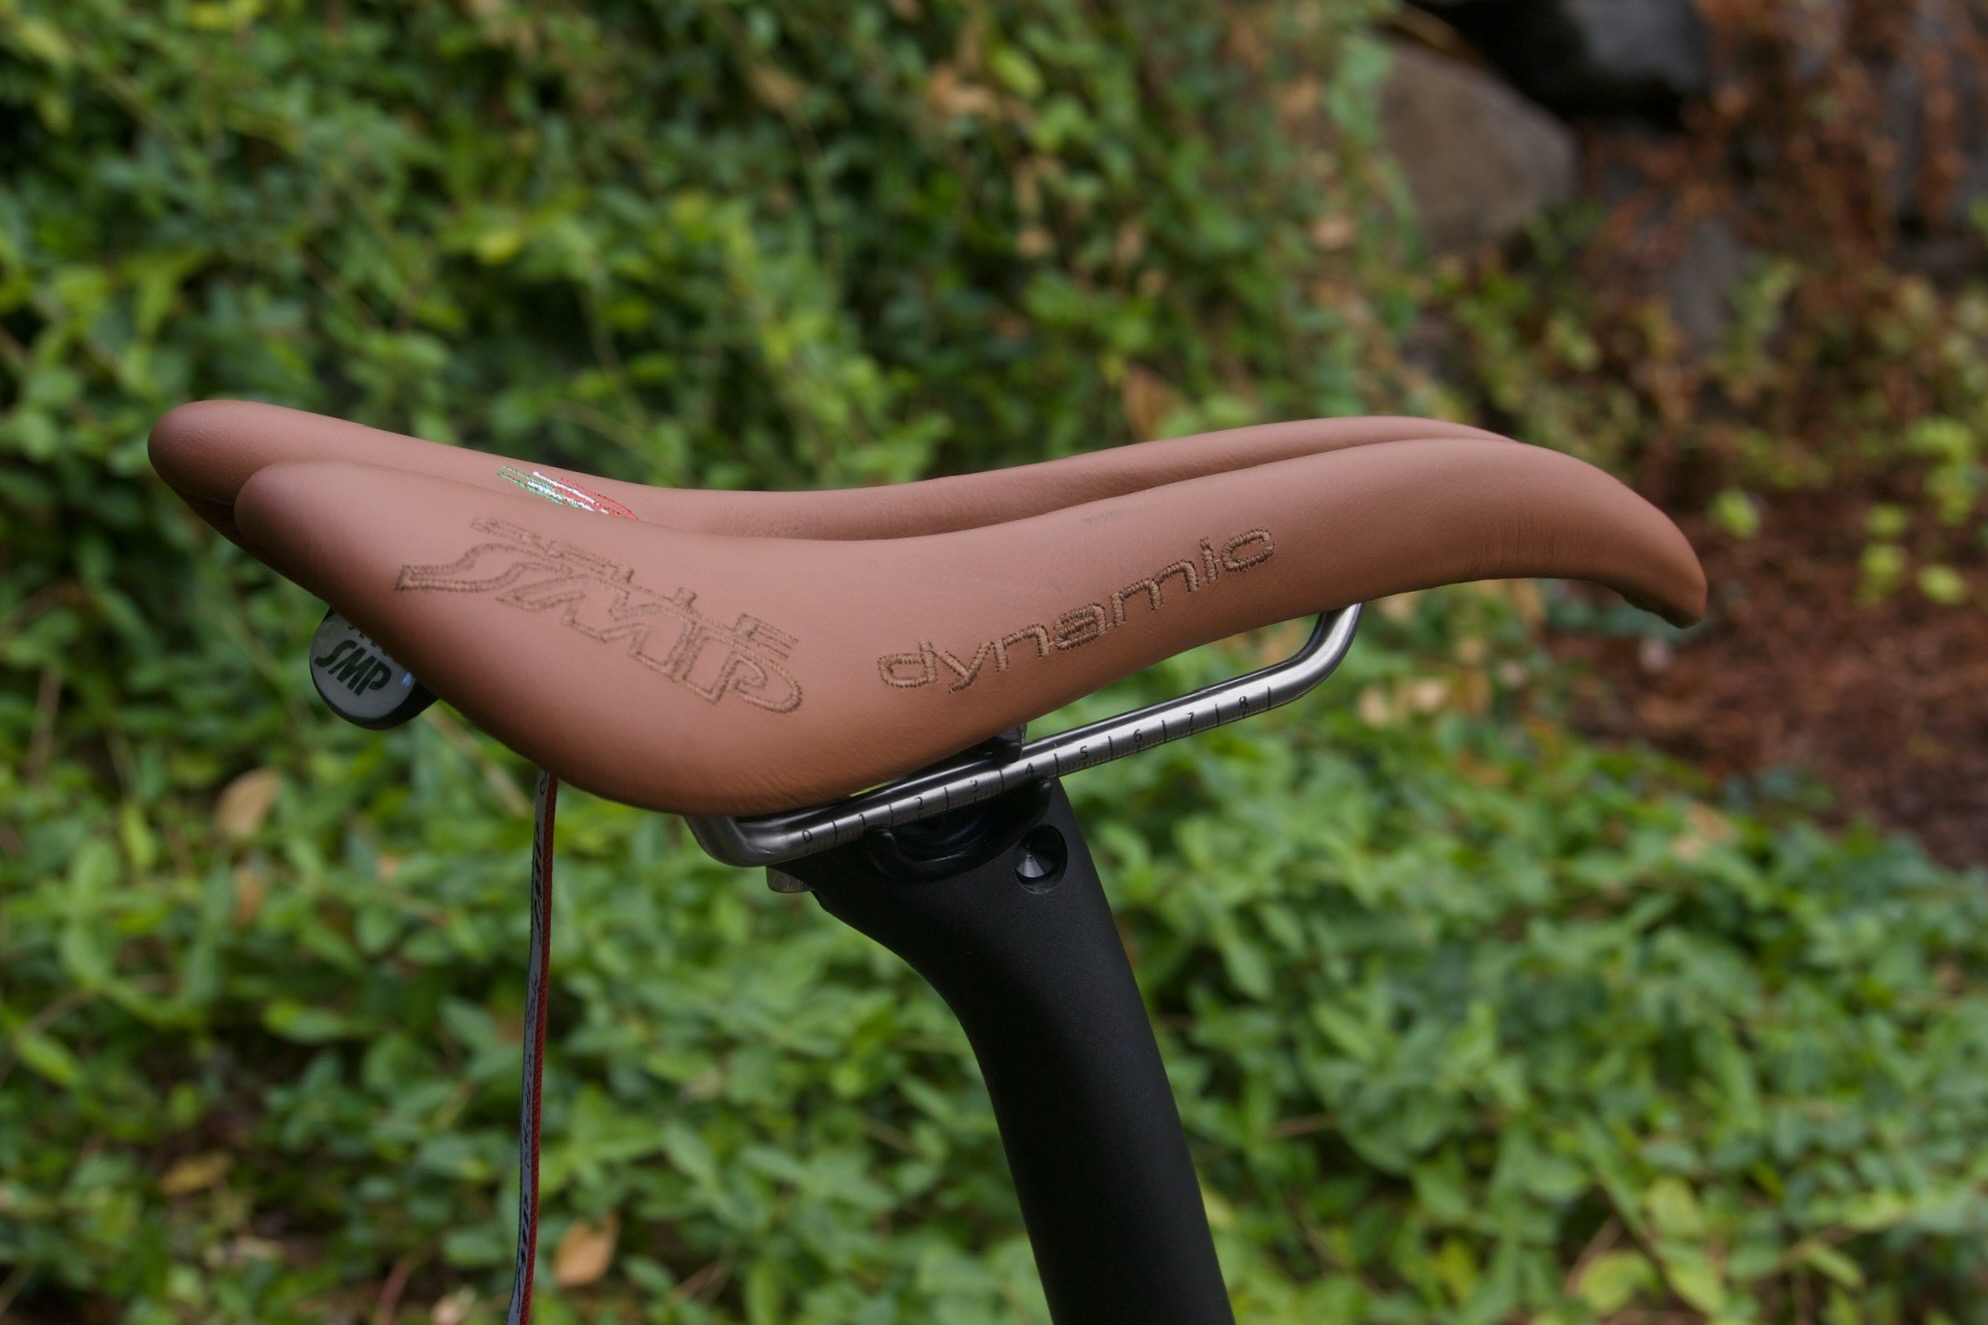 The tip to tail profile of the Selle SMP Dynamic road bike saddle